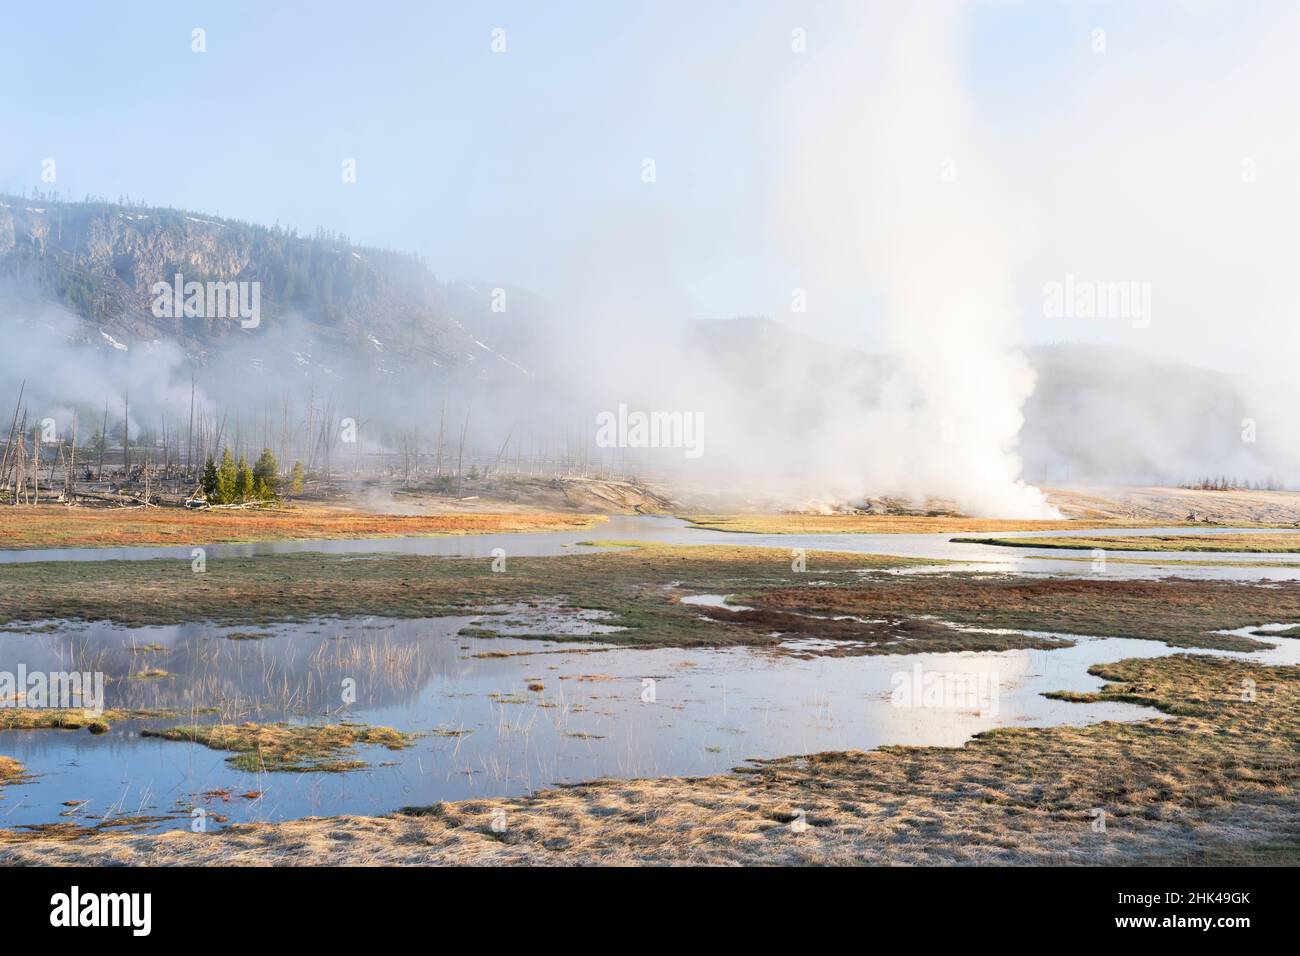 Yellowstone National Park, Black Sand Basin. Steam rising from the geysers and pools found in the Black Sand Basin. Stock Photo